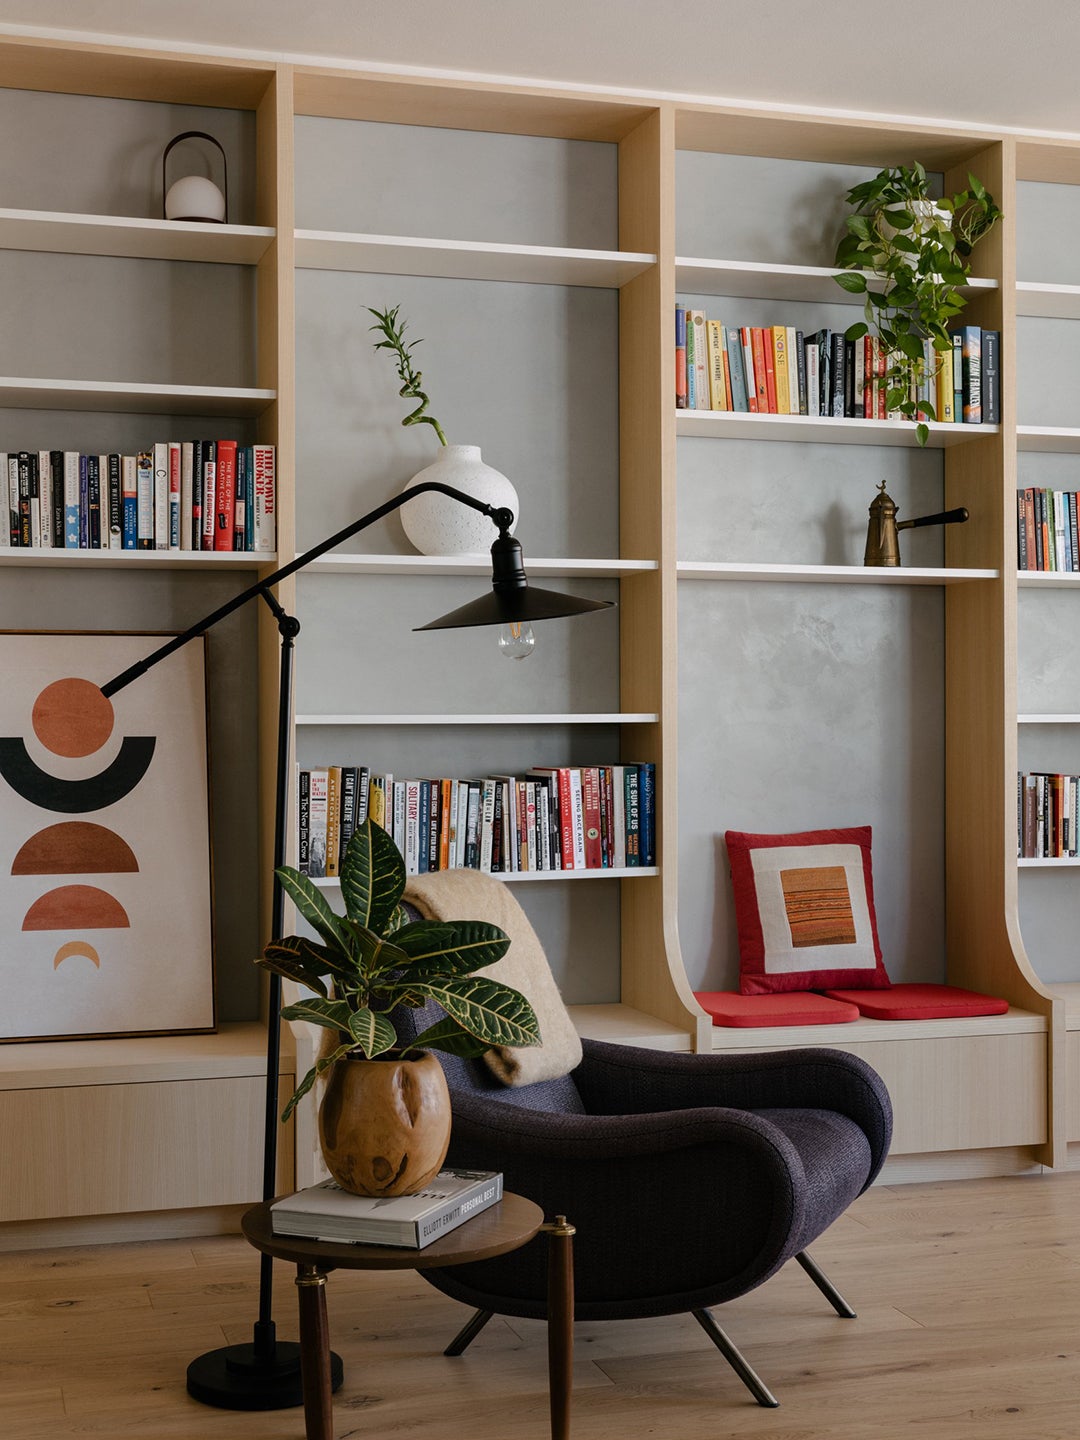 The Built-Ins in This Oversize Living Room Are for Far More Than Books